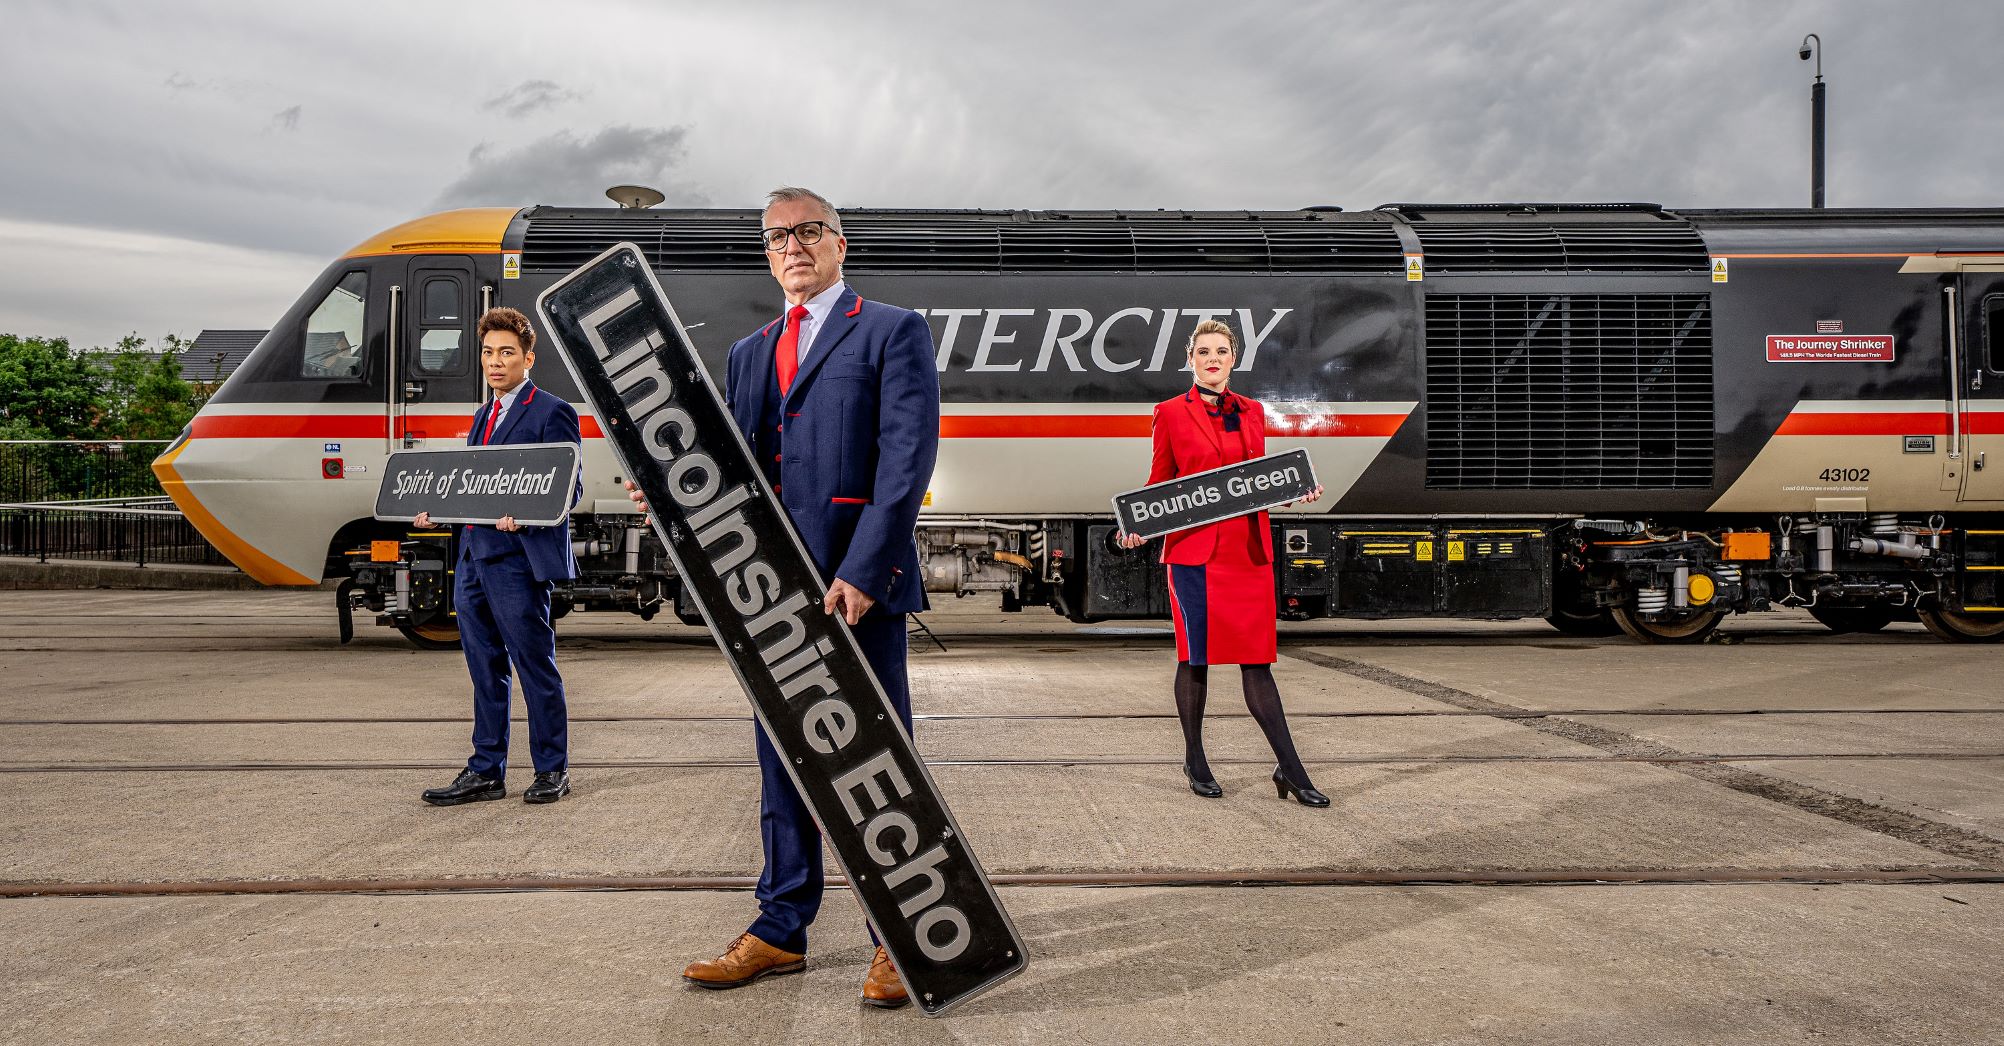 Historic LNER Nameplates Raise Thousands Of Pounds For Charity